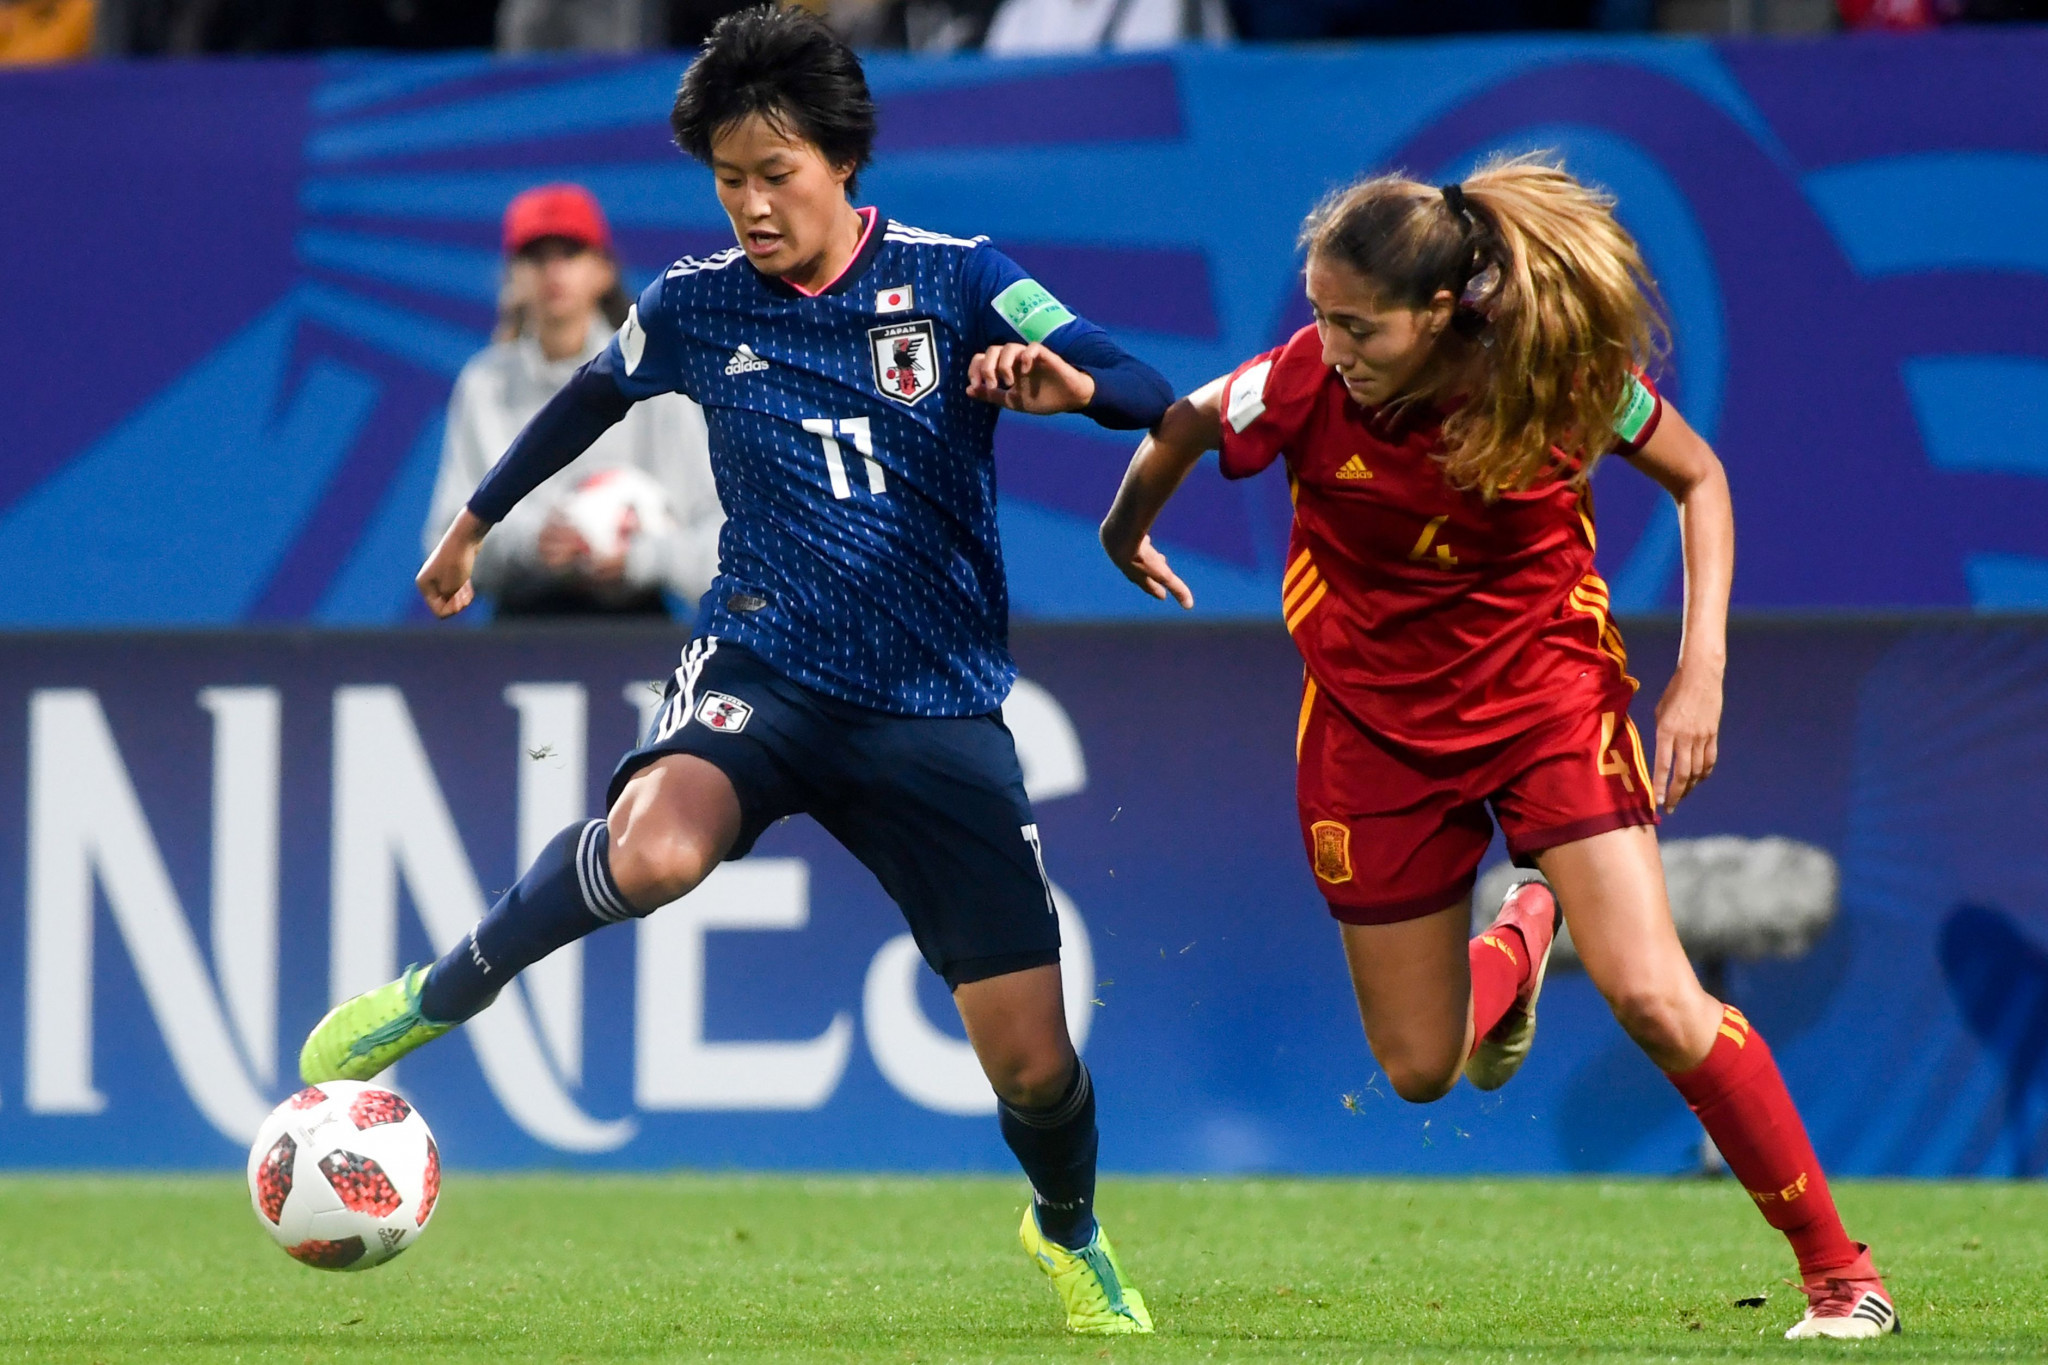 Japan proved too strong for Spain in the final ©Getty Images